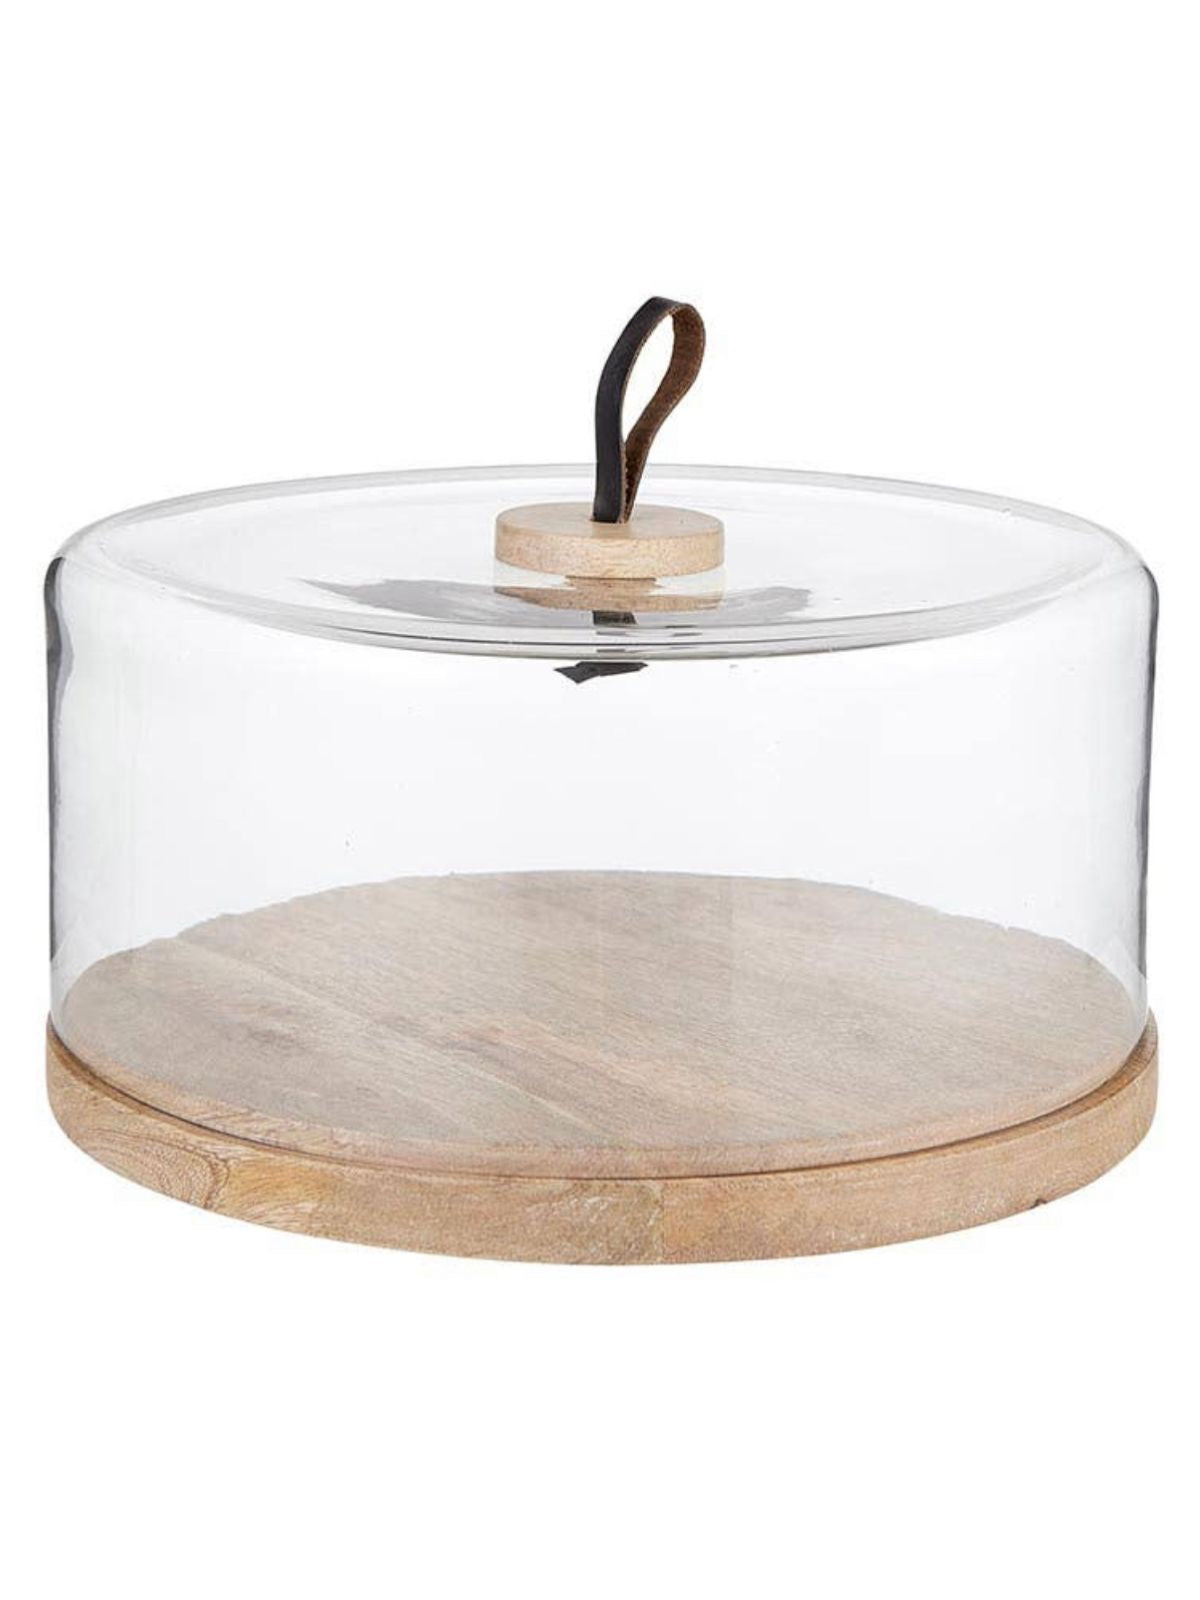 Mango Wood Stand With Glass Dome Sold by KYA Home Decor.